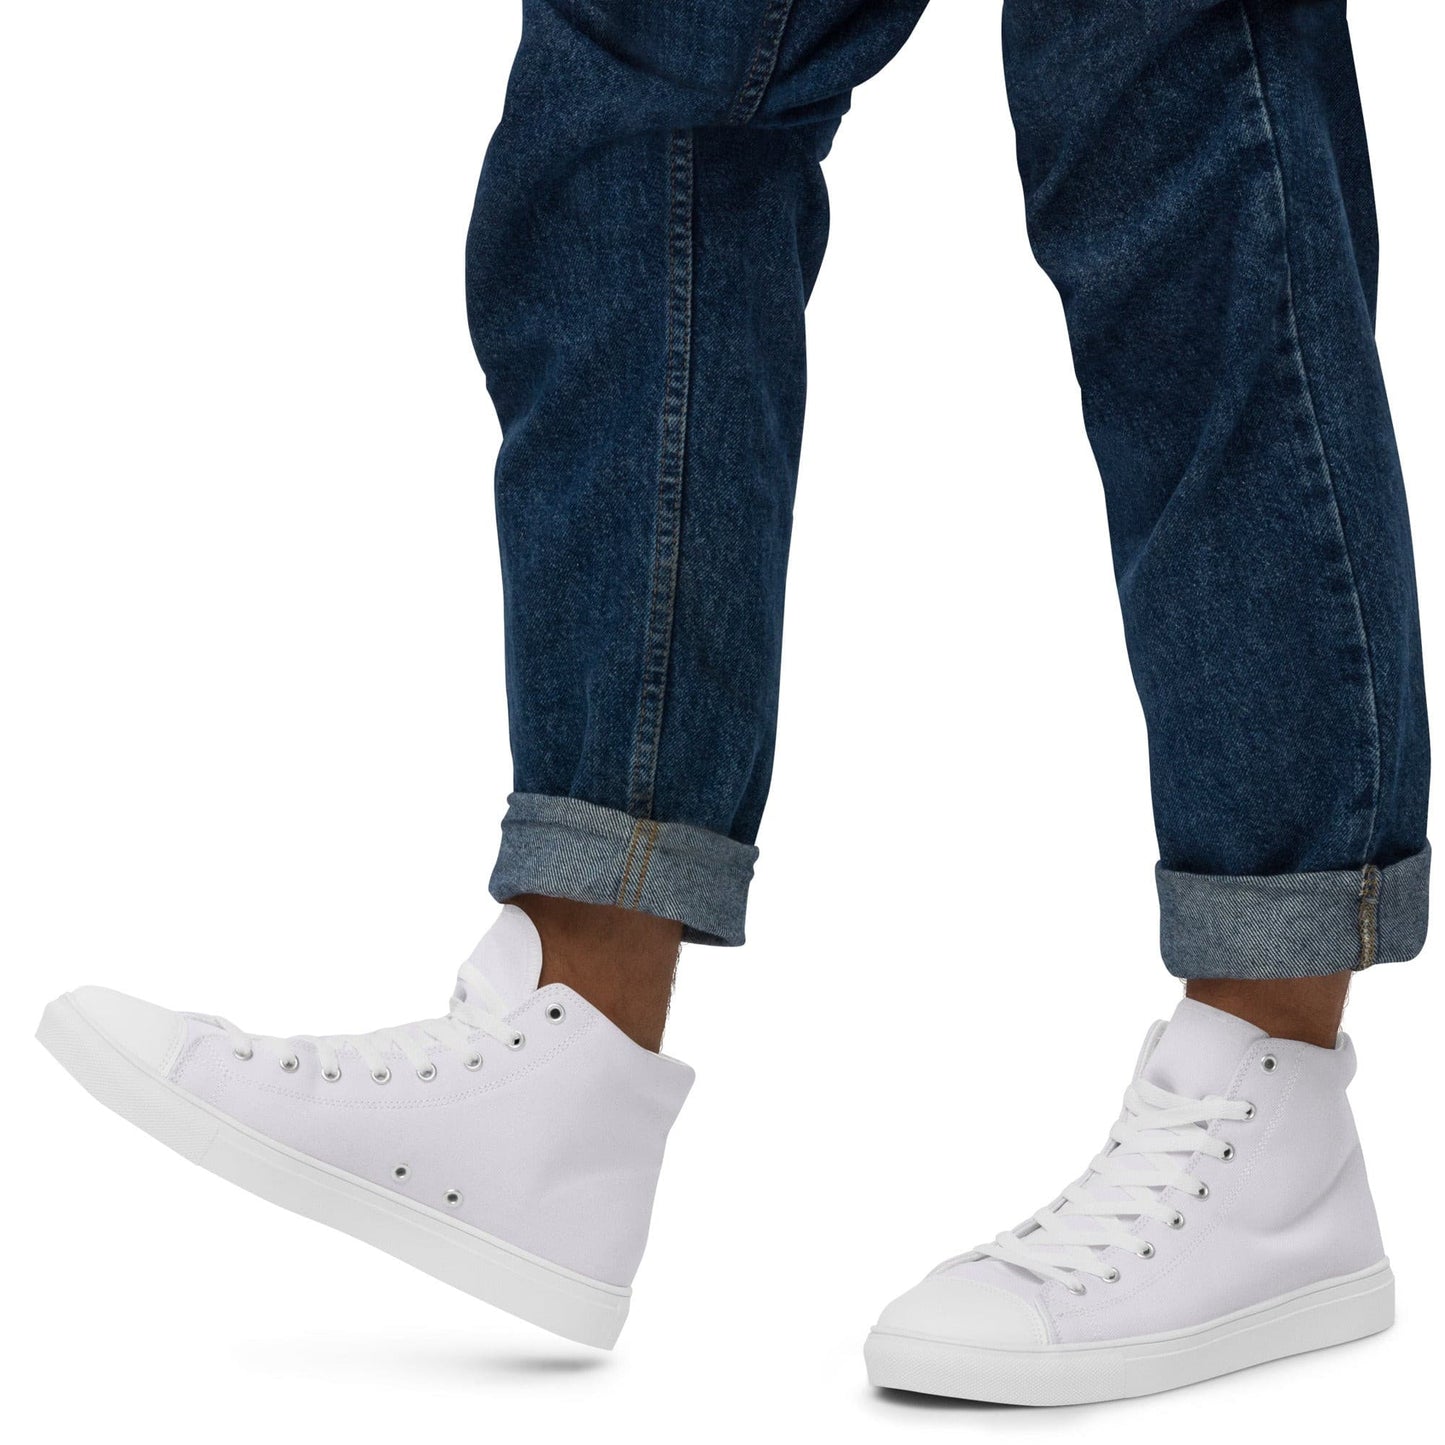 Classic White high top canvas shoes (Men's Sizing)